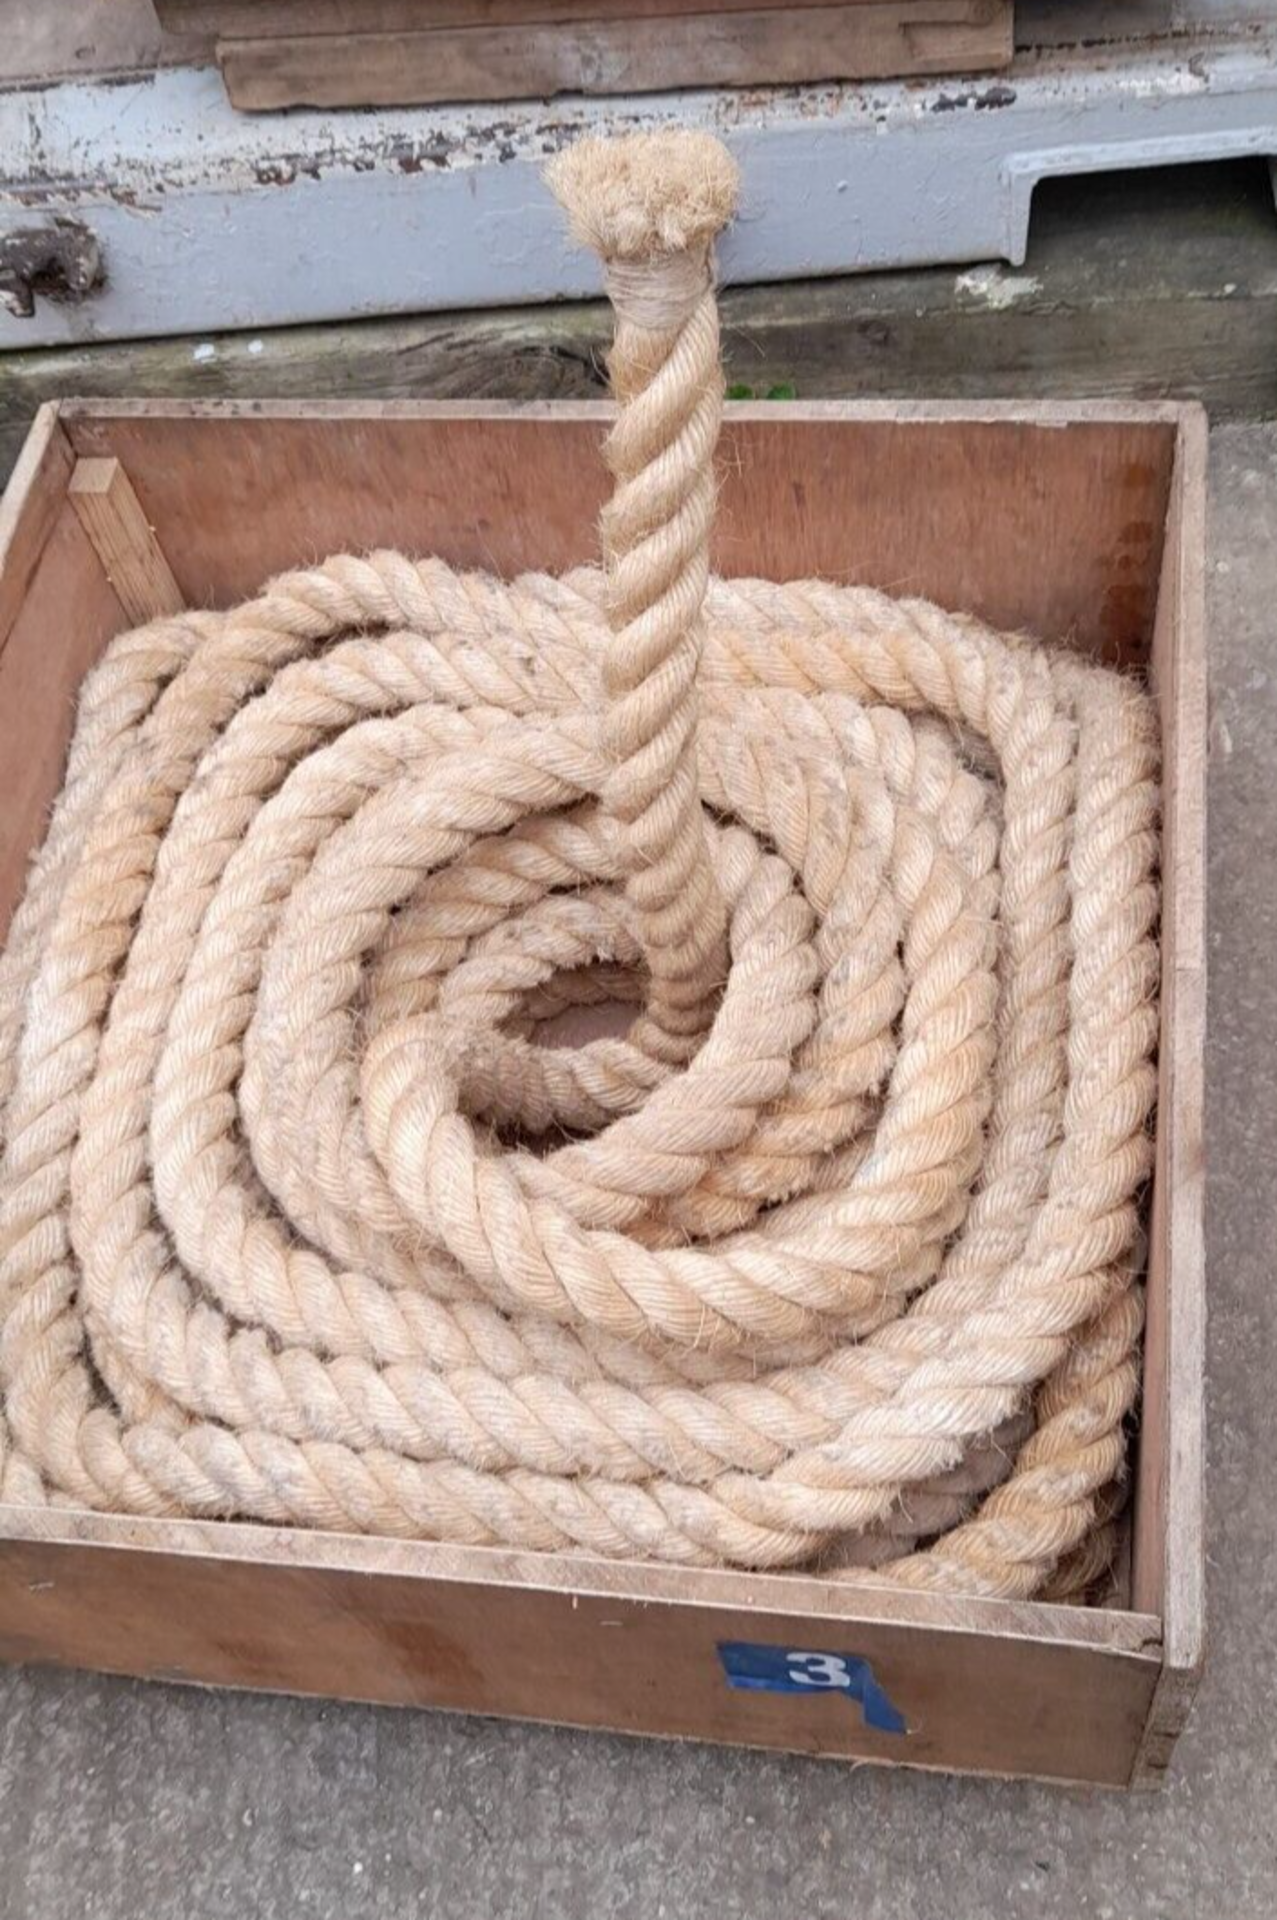 sport TUG O WAR ROPE, USED ONCE, DRY STORED, ABOUT 29 METERS L X 13cm circumference sport gym - Bild 5 aus 5